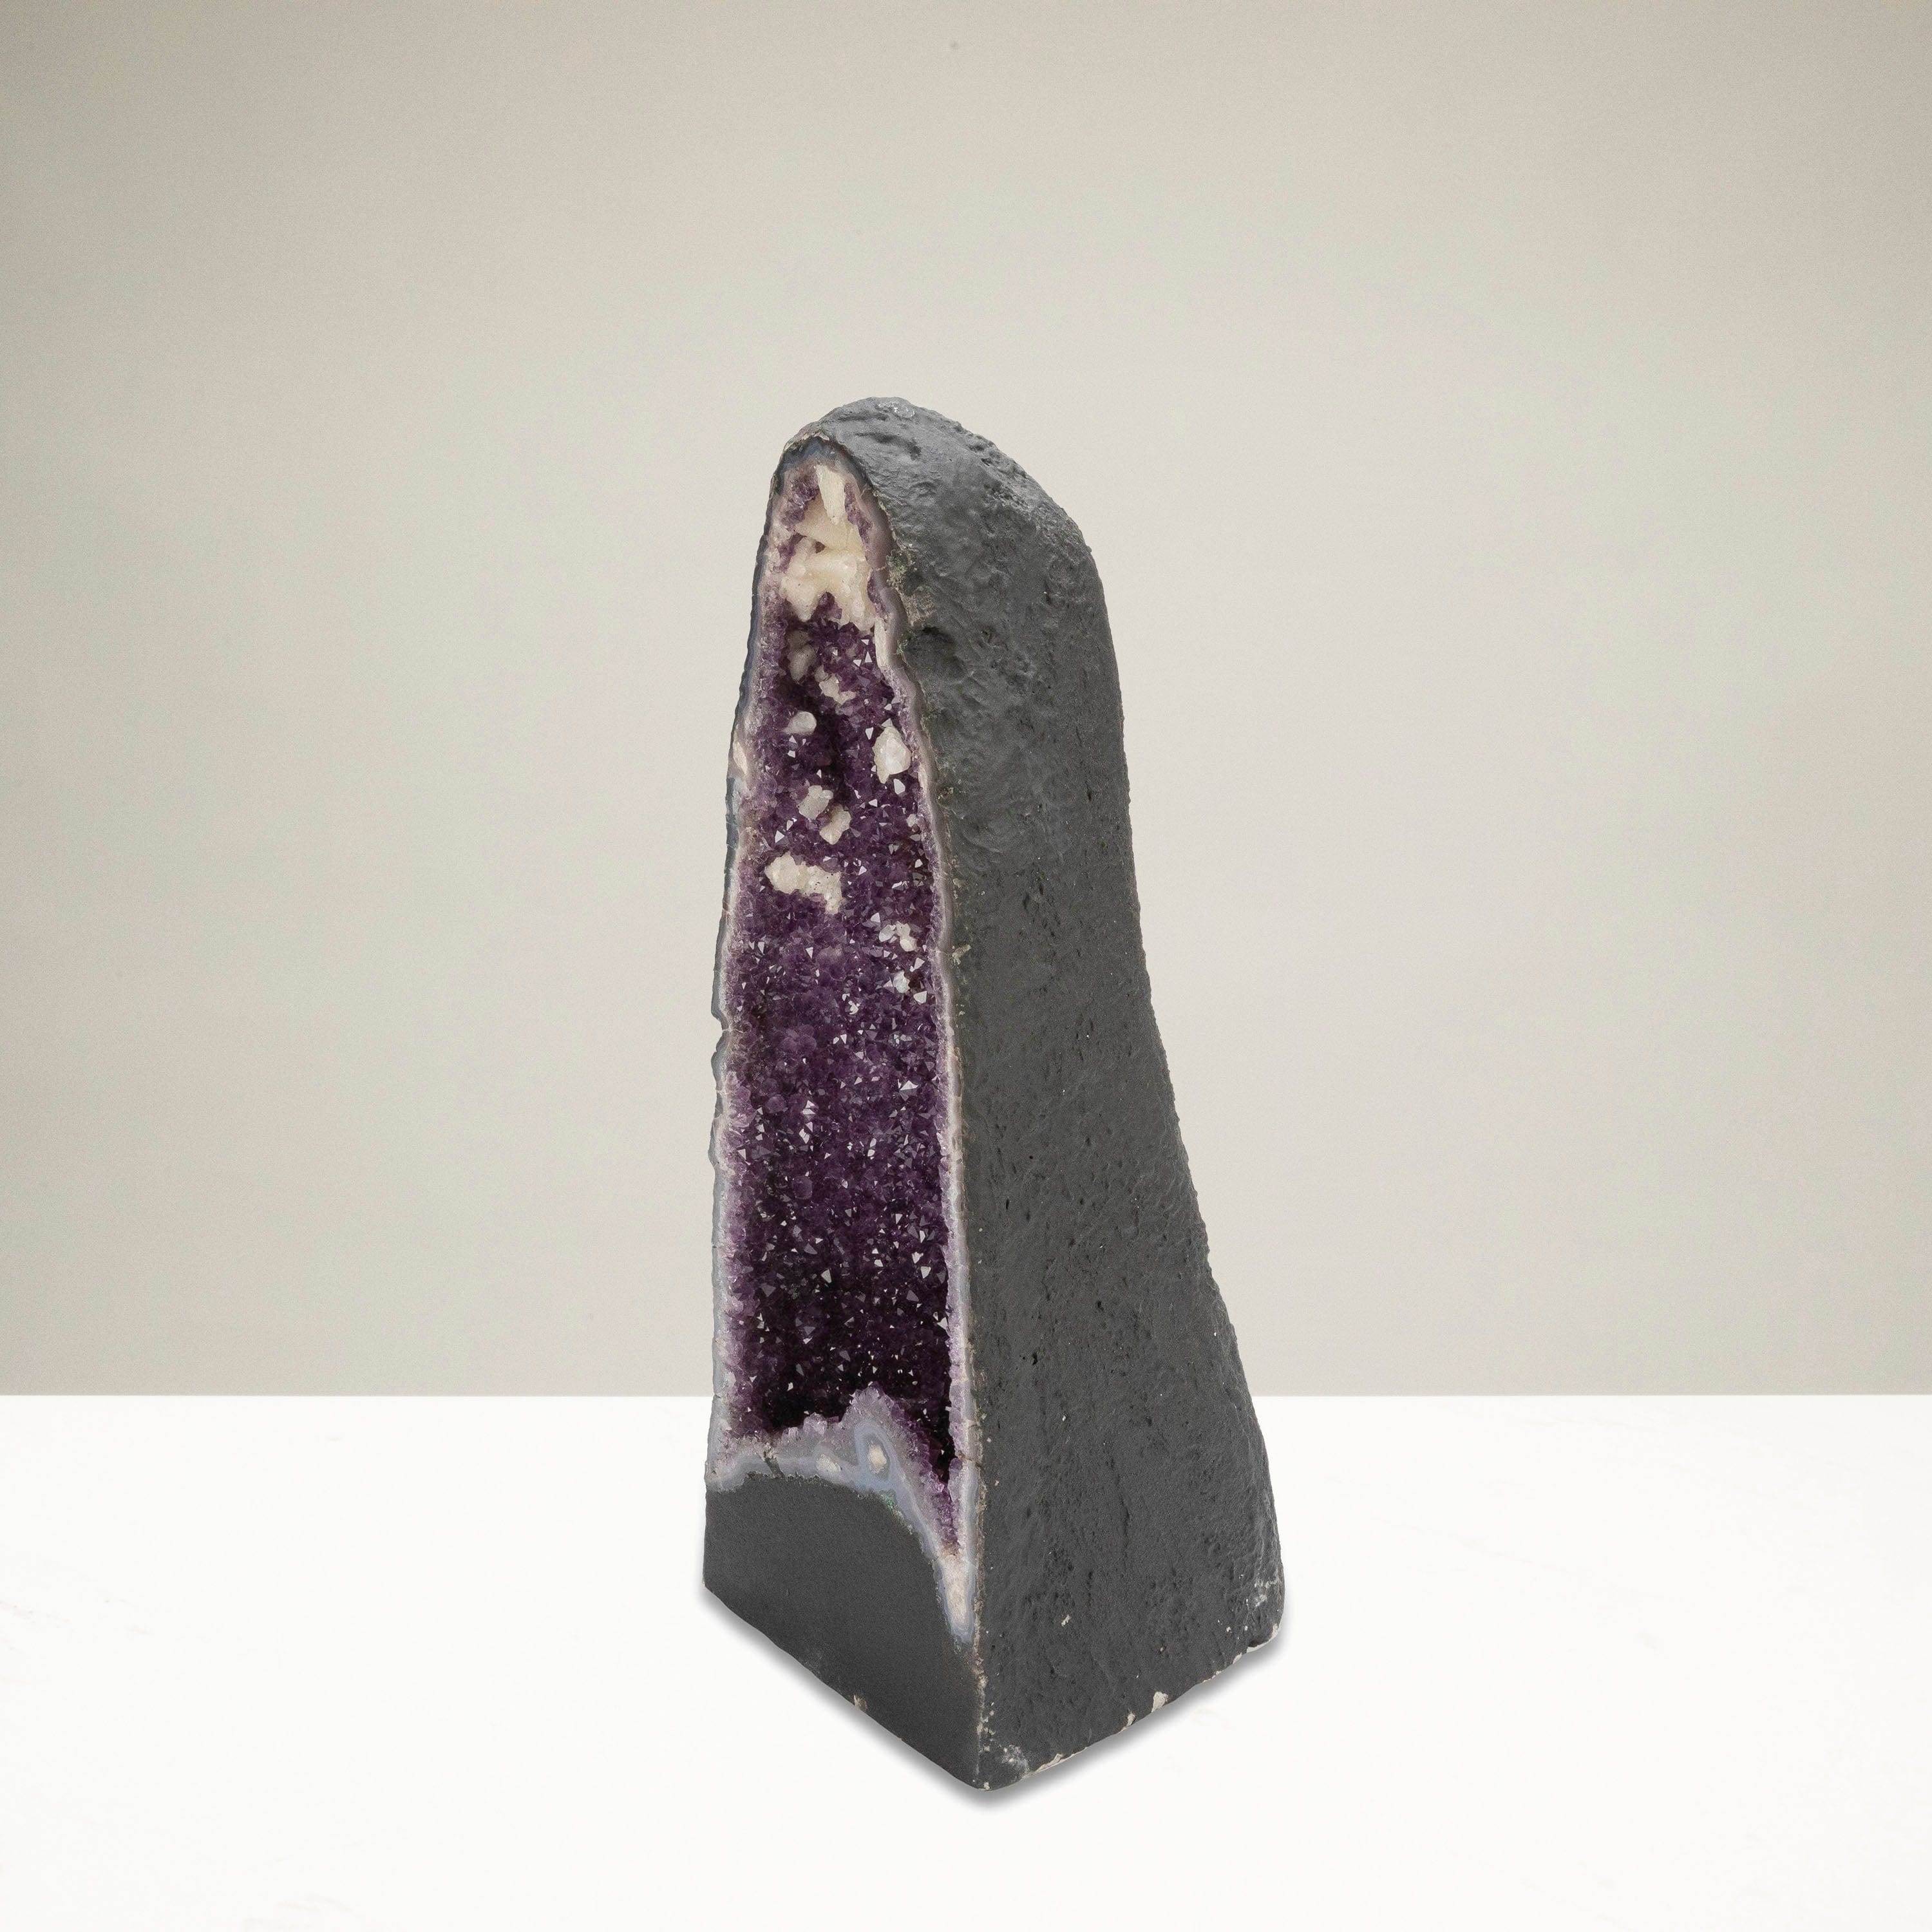 Kalifano Amethyst Amethyst Geode Cathedral - 22" / 45 lbs BAG8000.005